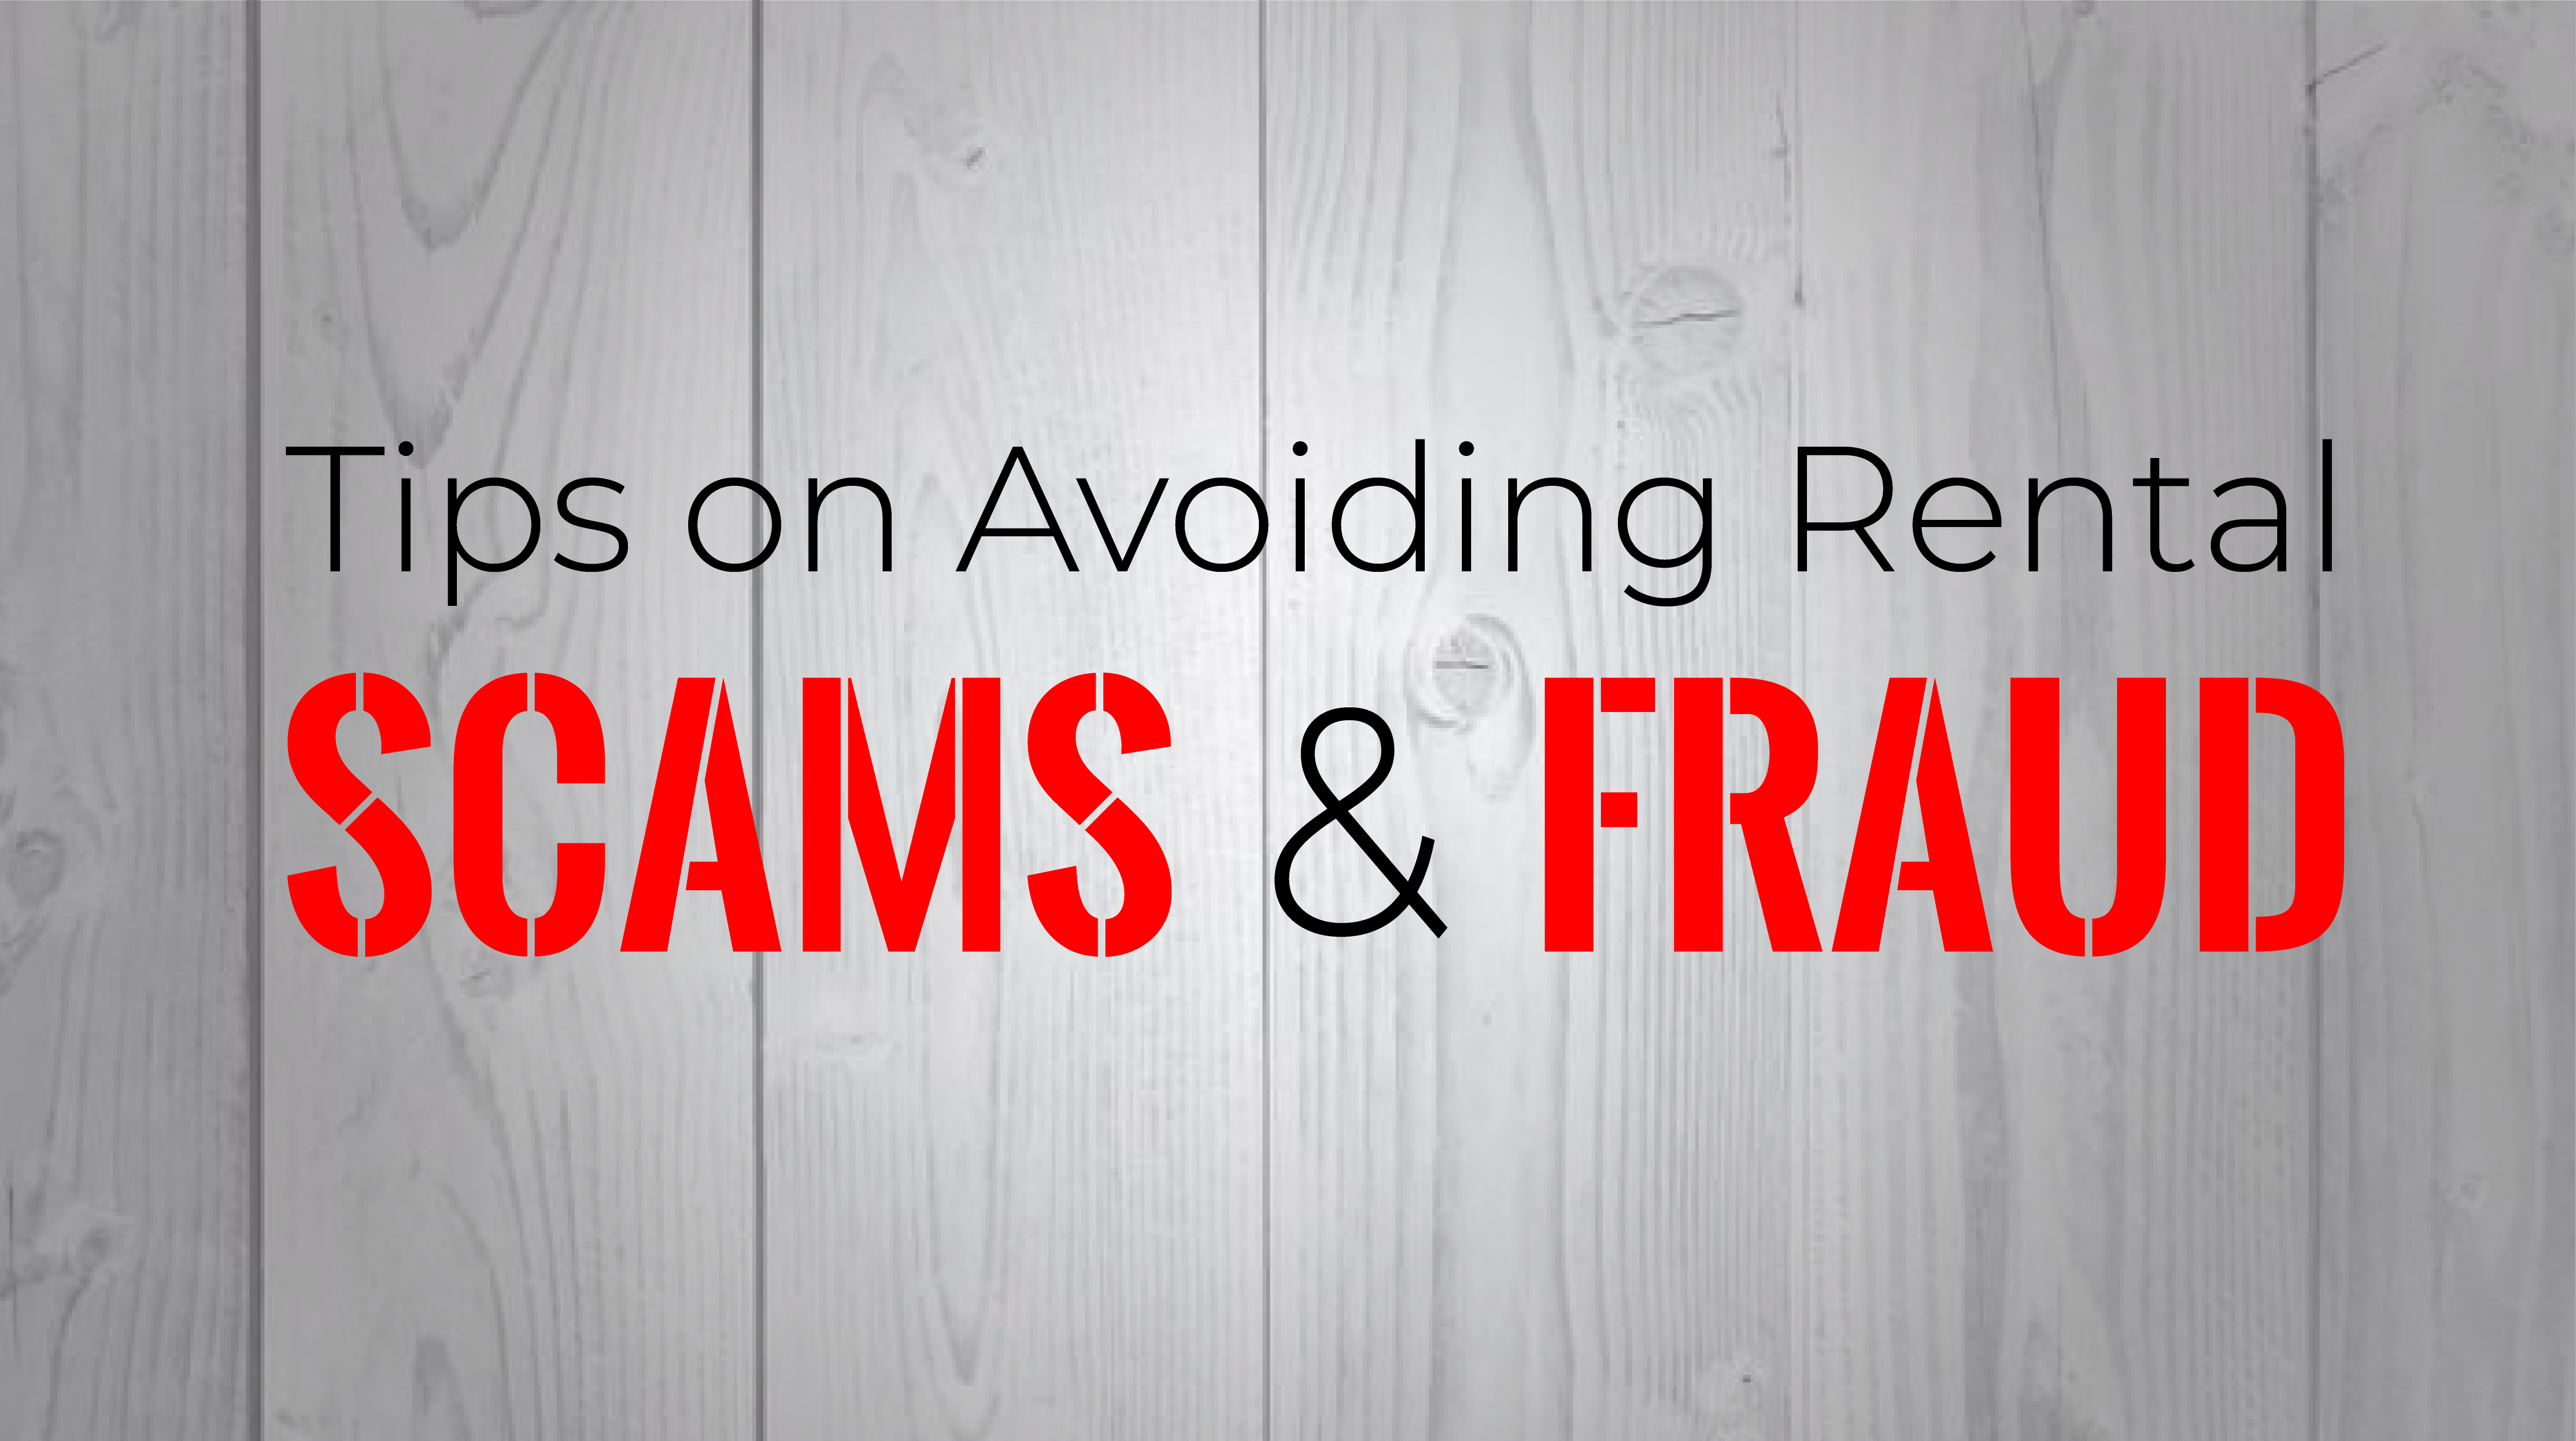 Avoid Rental Scams and Fraud